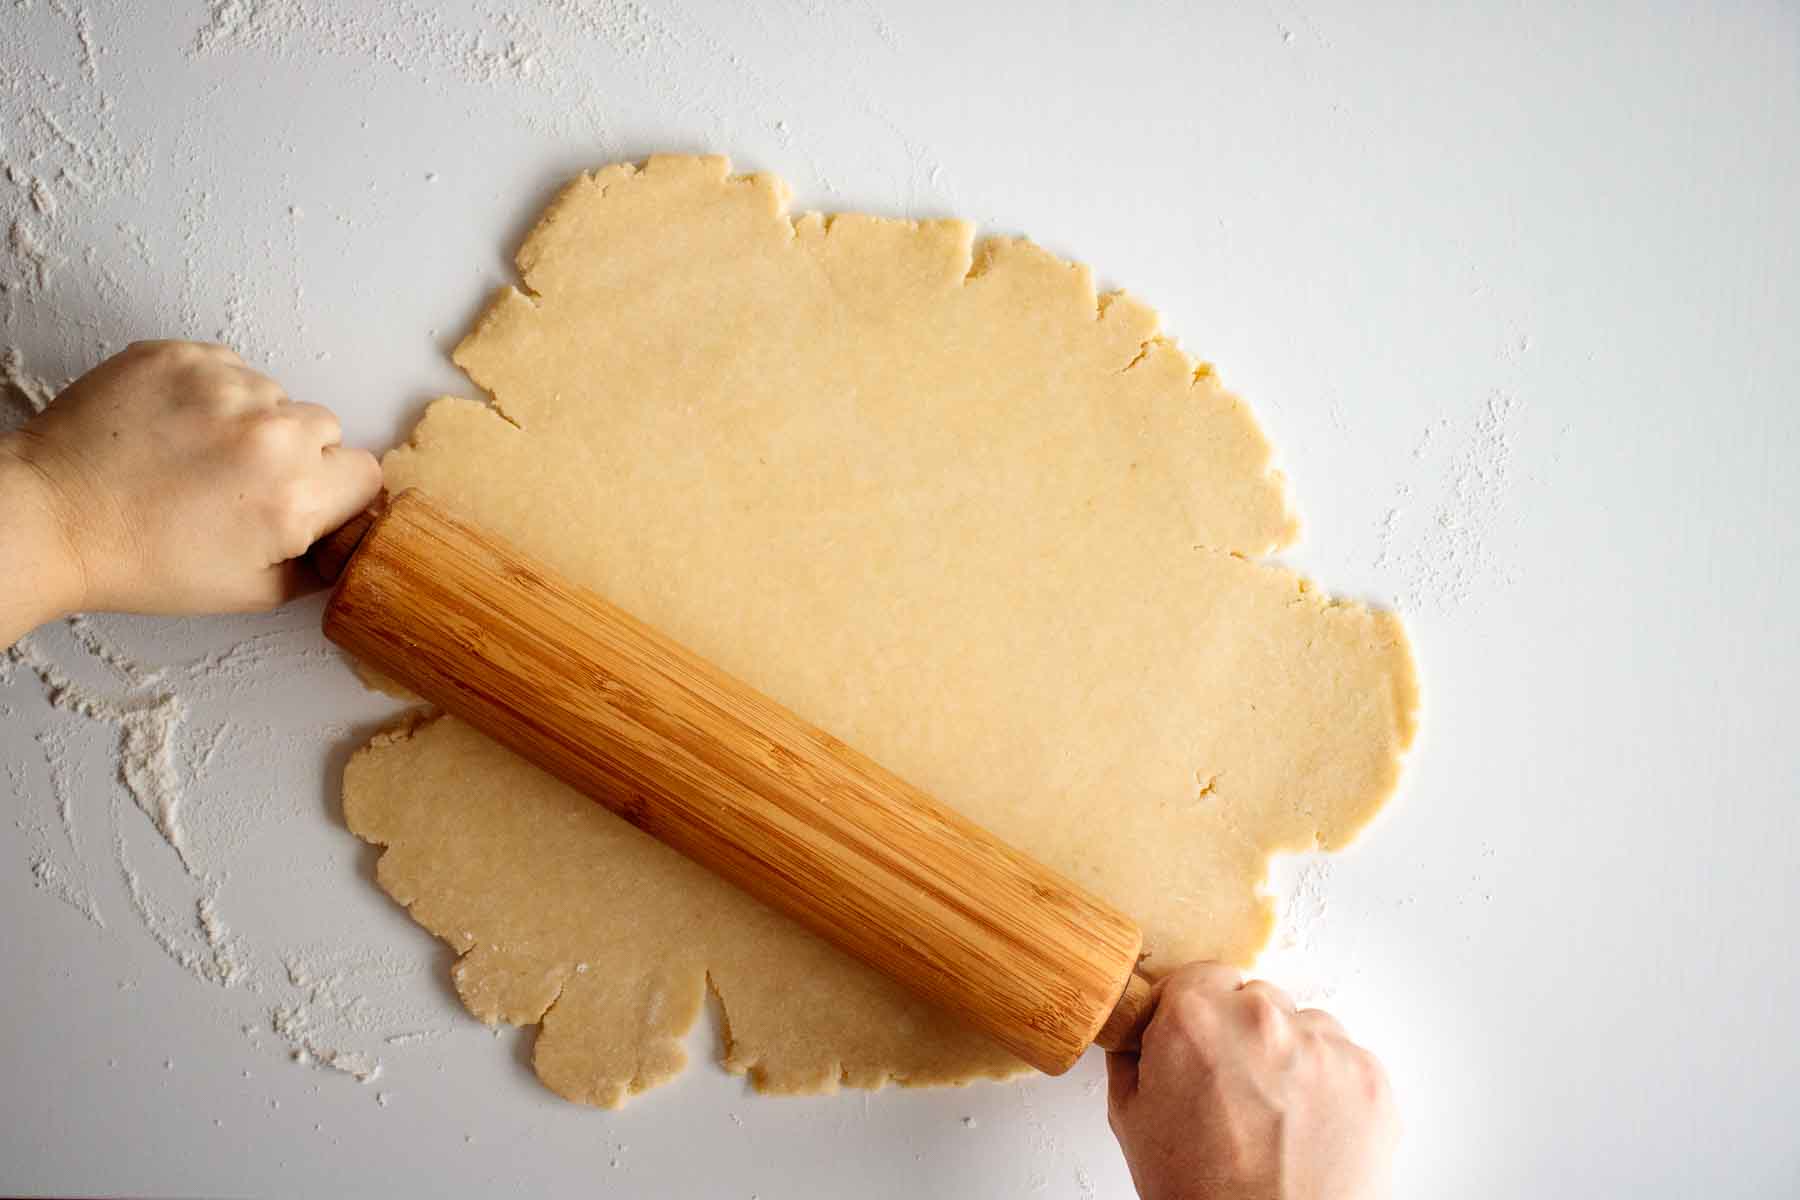 Pie crust dough being opened with a rolling pin.